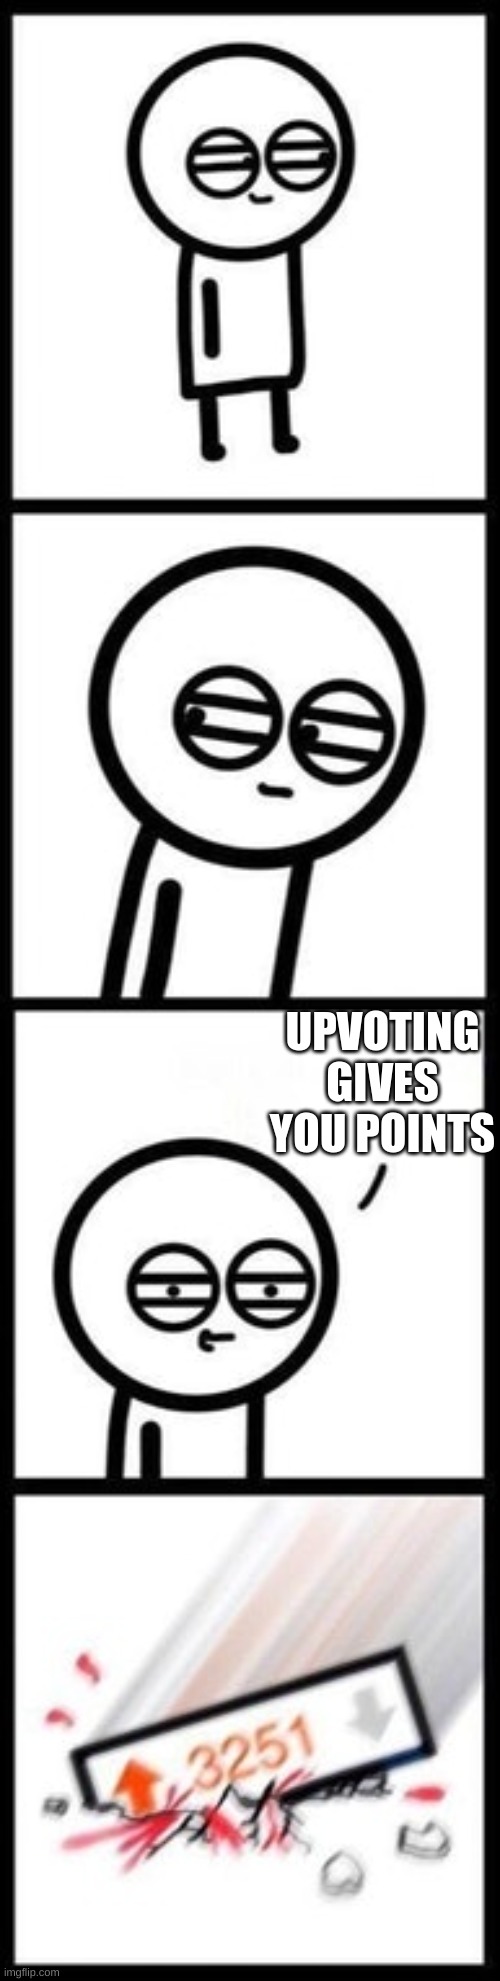 3251 upvotes | UPVOTING GIVES YOU POINTS | image tagged in 3251 upvotes | made w/ Imgflip meme maker